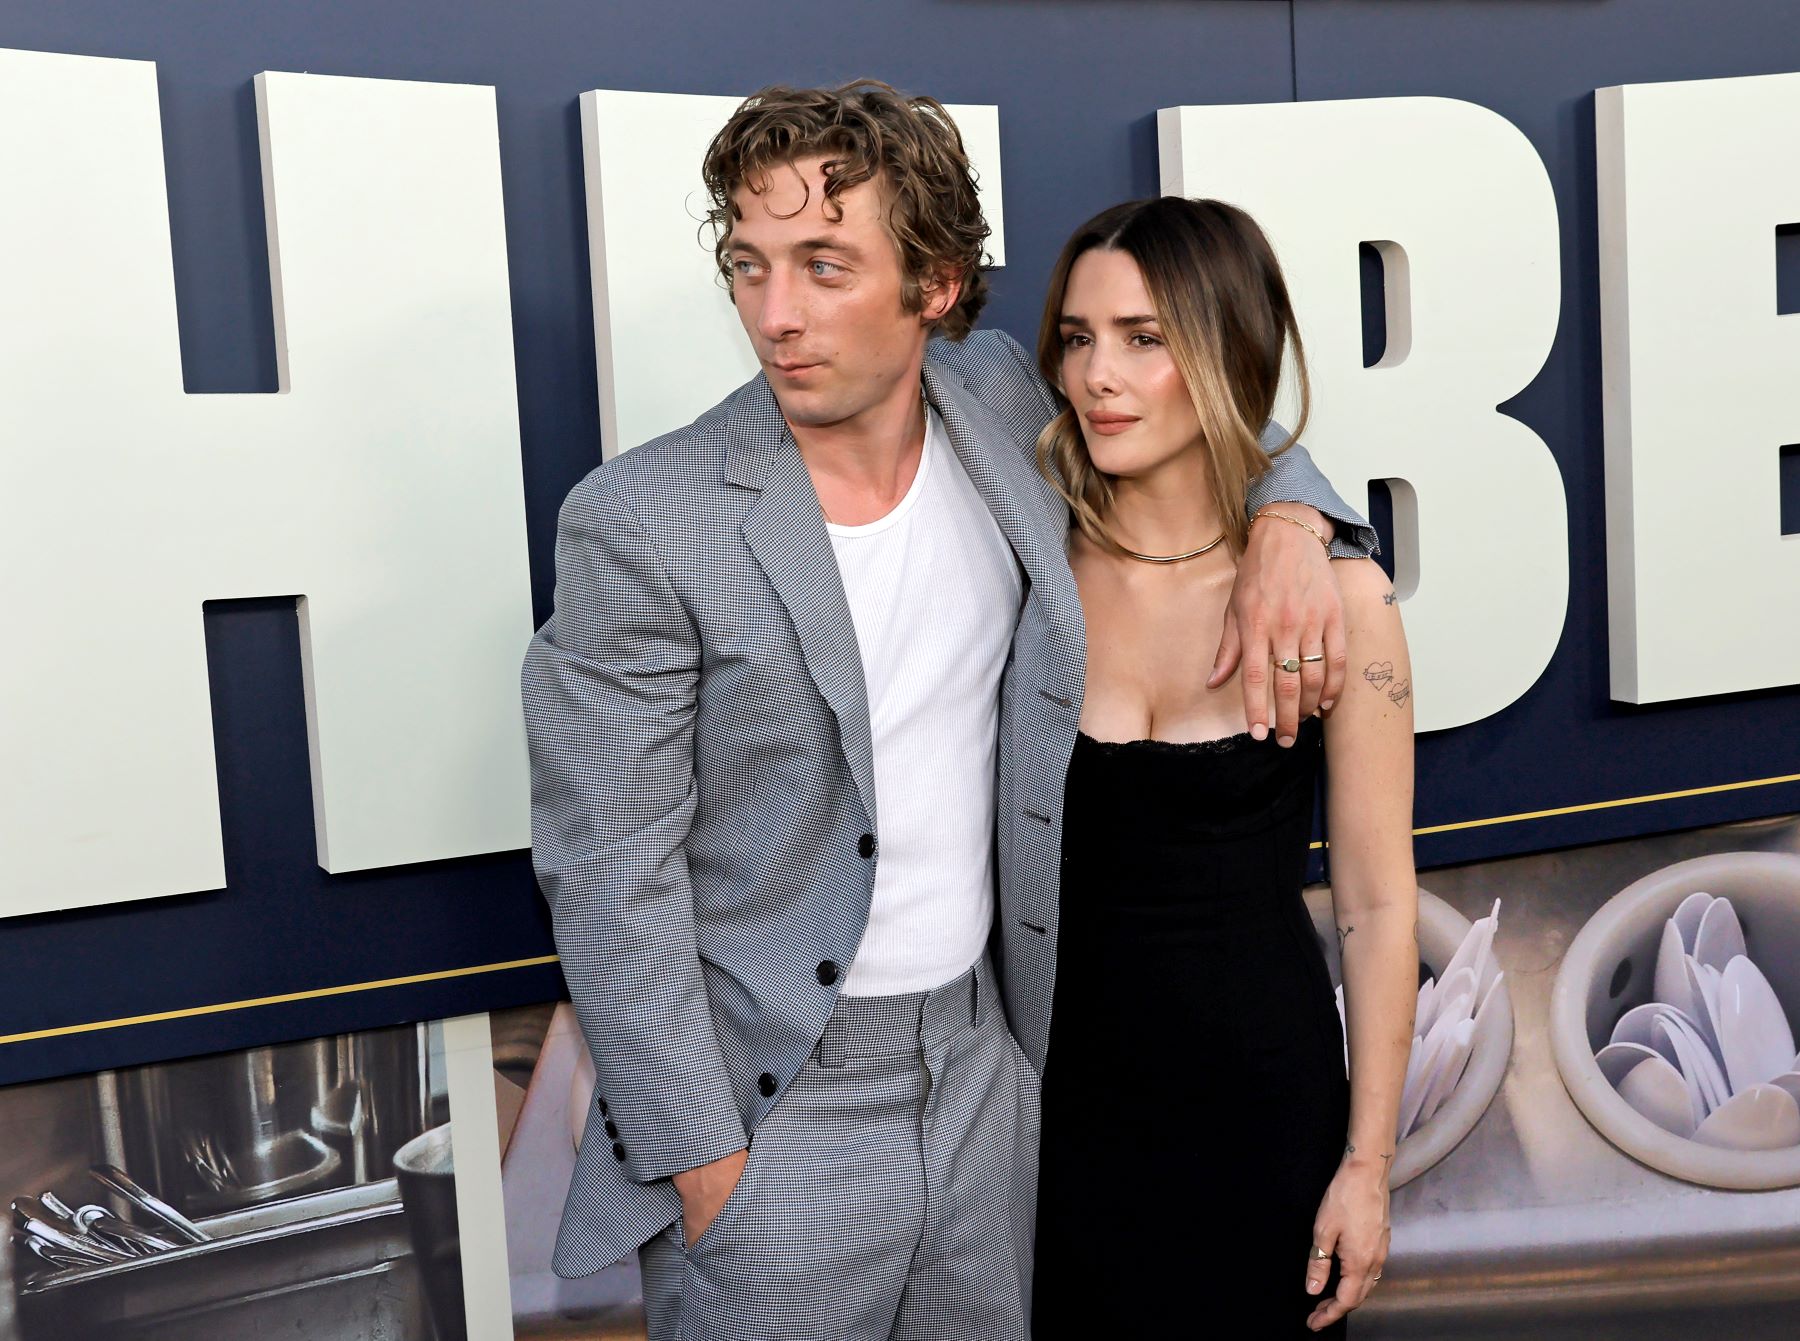 Jeremy Allen White and Addison Timlin at 'The Bear' premiere at Goya Studios in Los Angeles, California